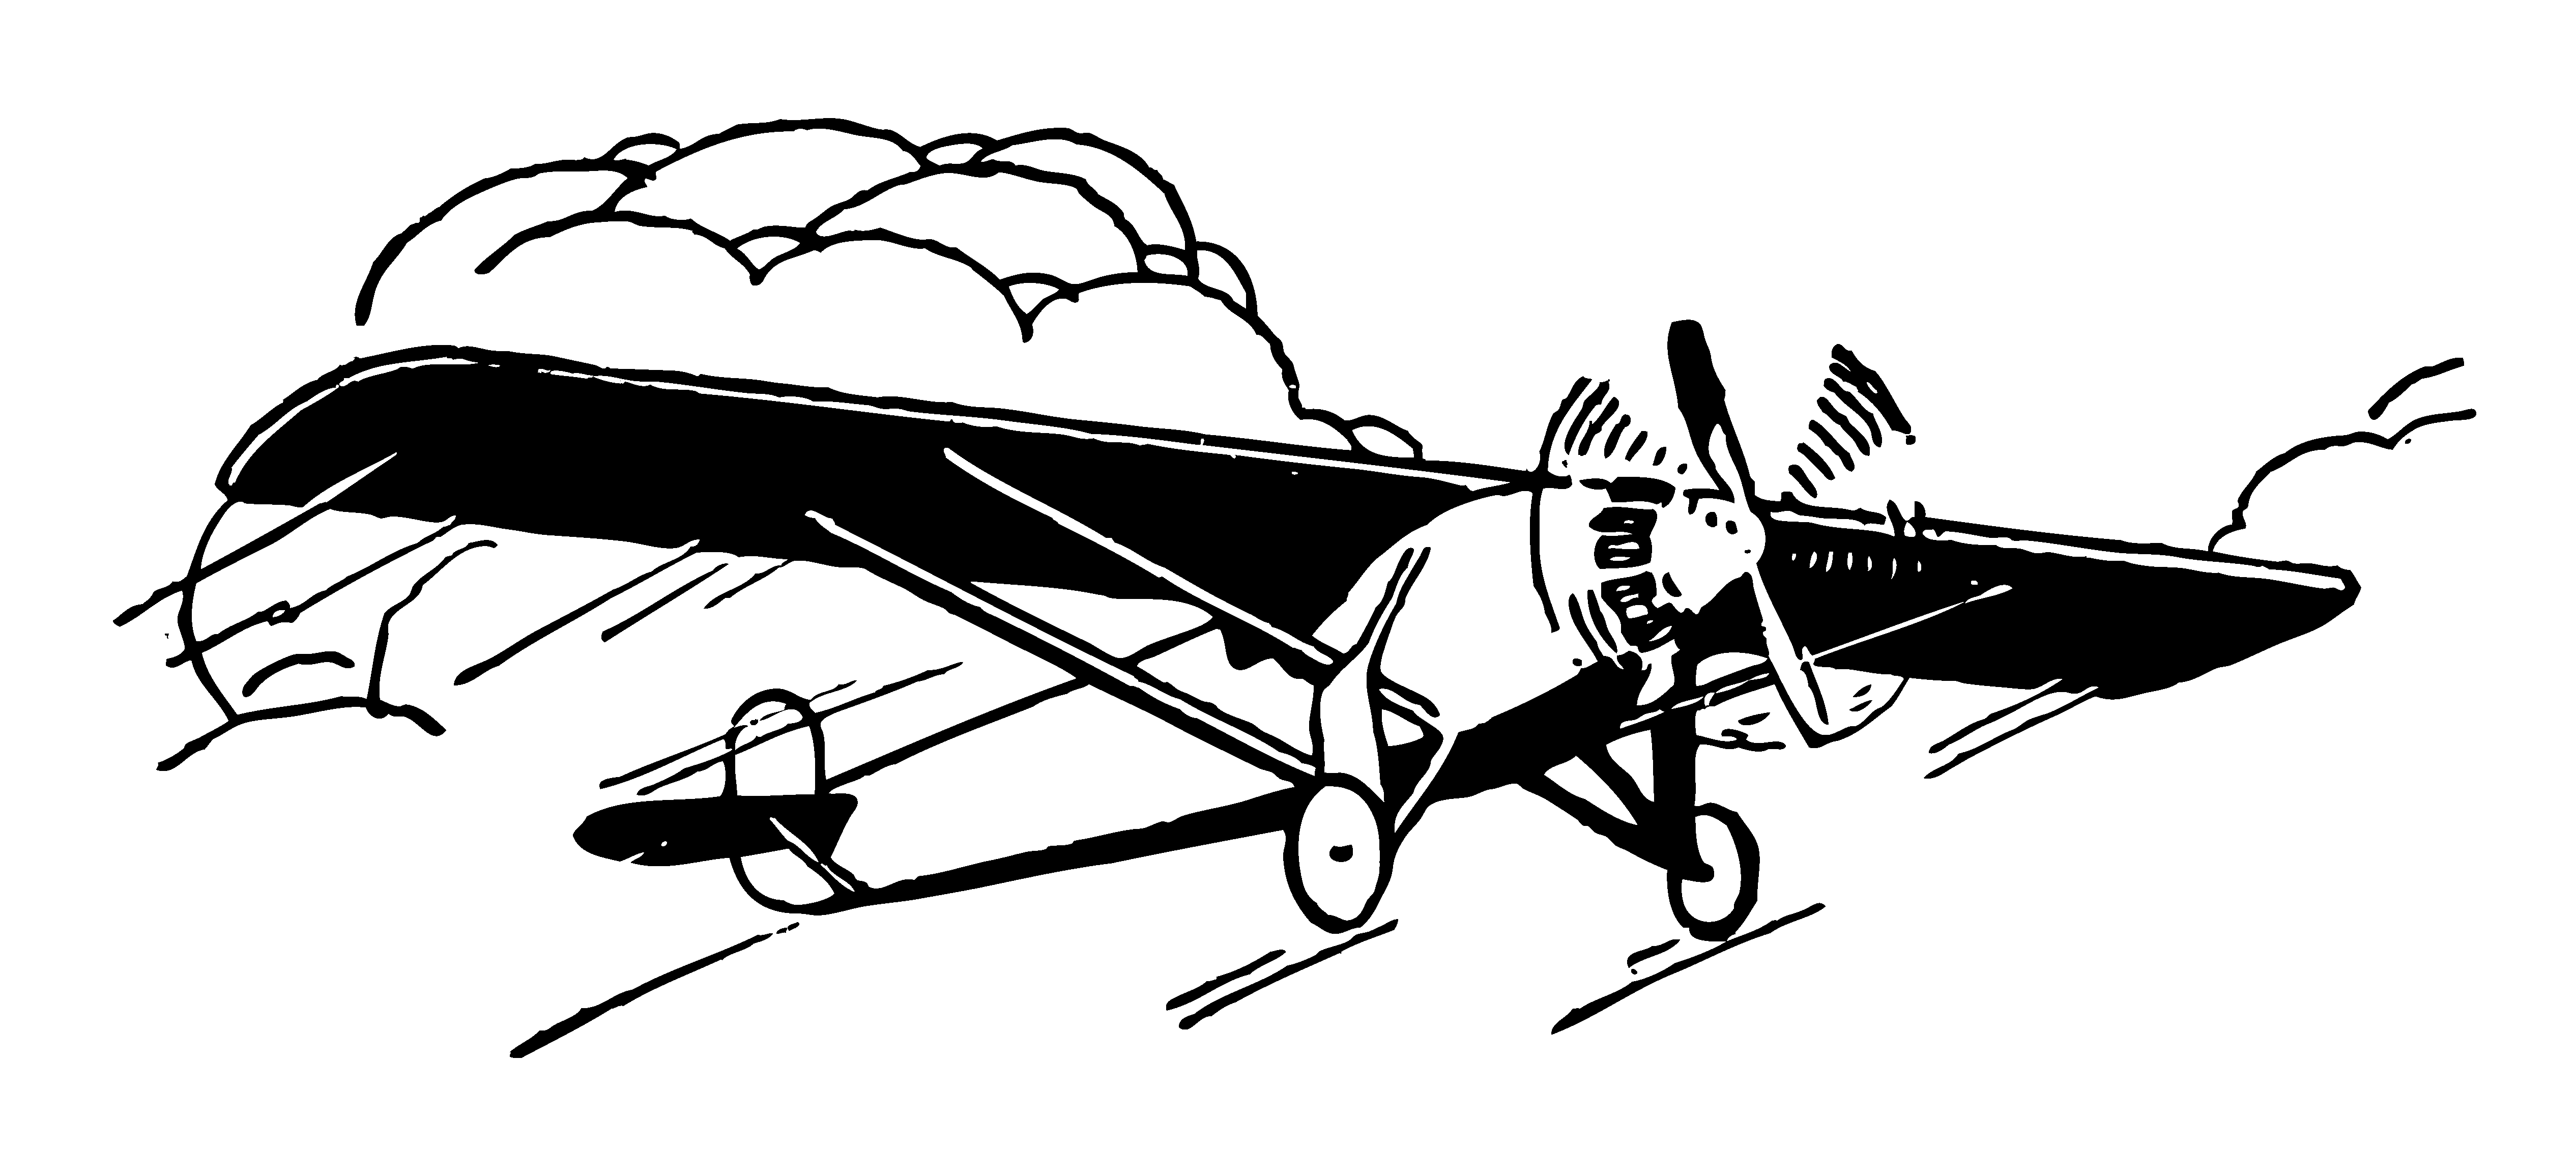 Vintage Airplane Clipart Black And White.